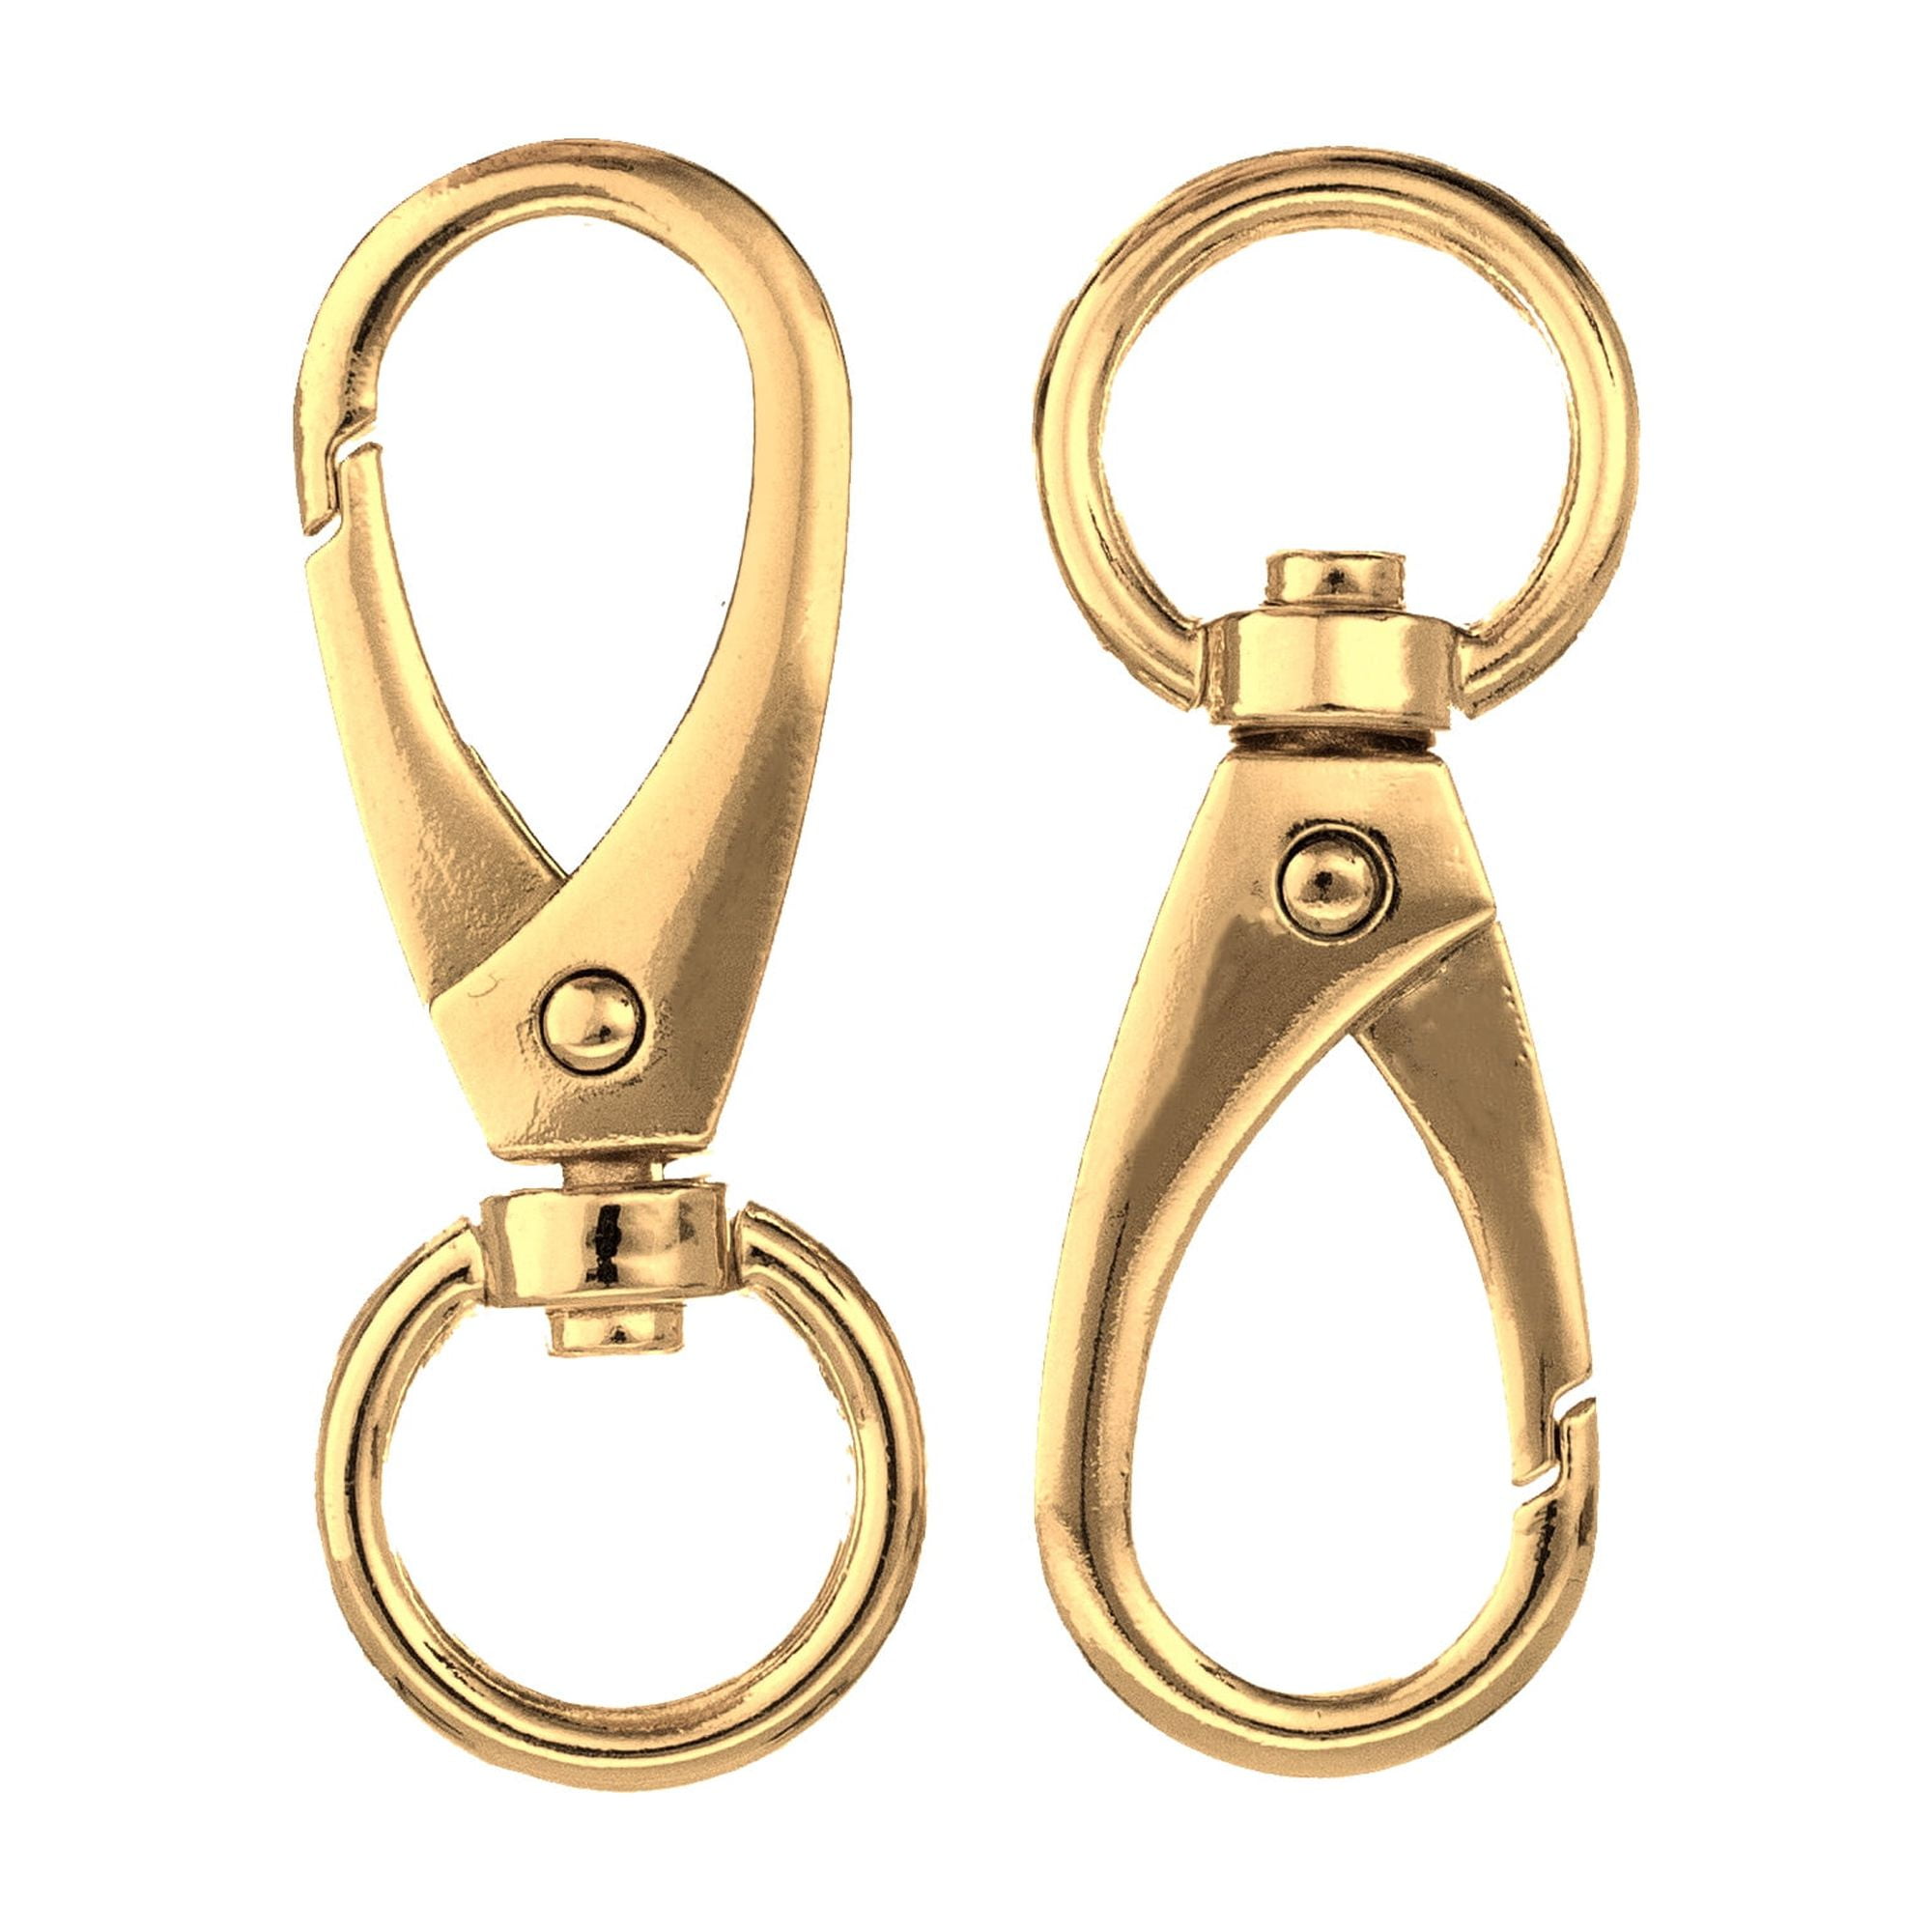 PARACORD PLANET 1/2 Inch Swivel Snap Hooks - Gold - Key chains & Lanyards -  Various Pack Sizes 